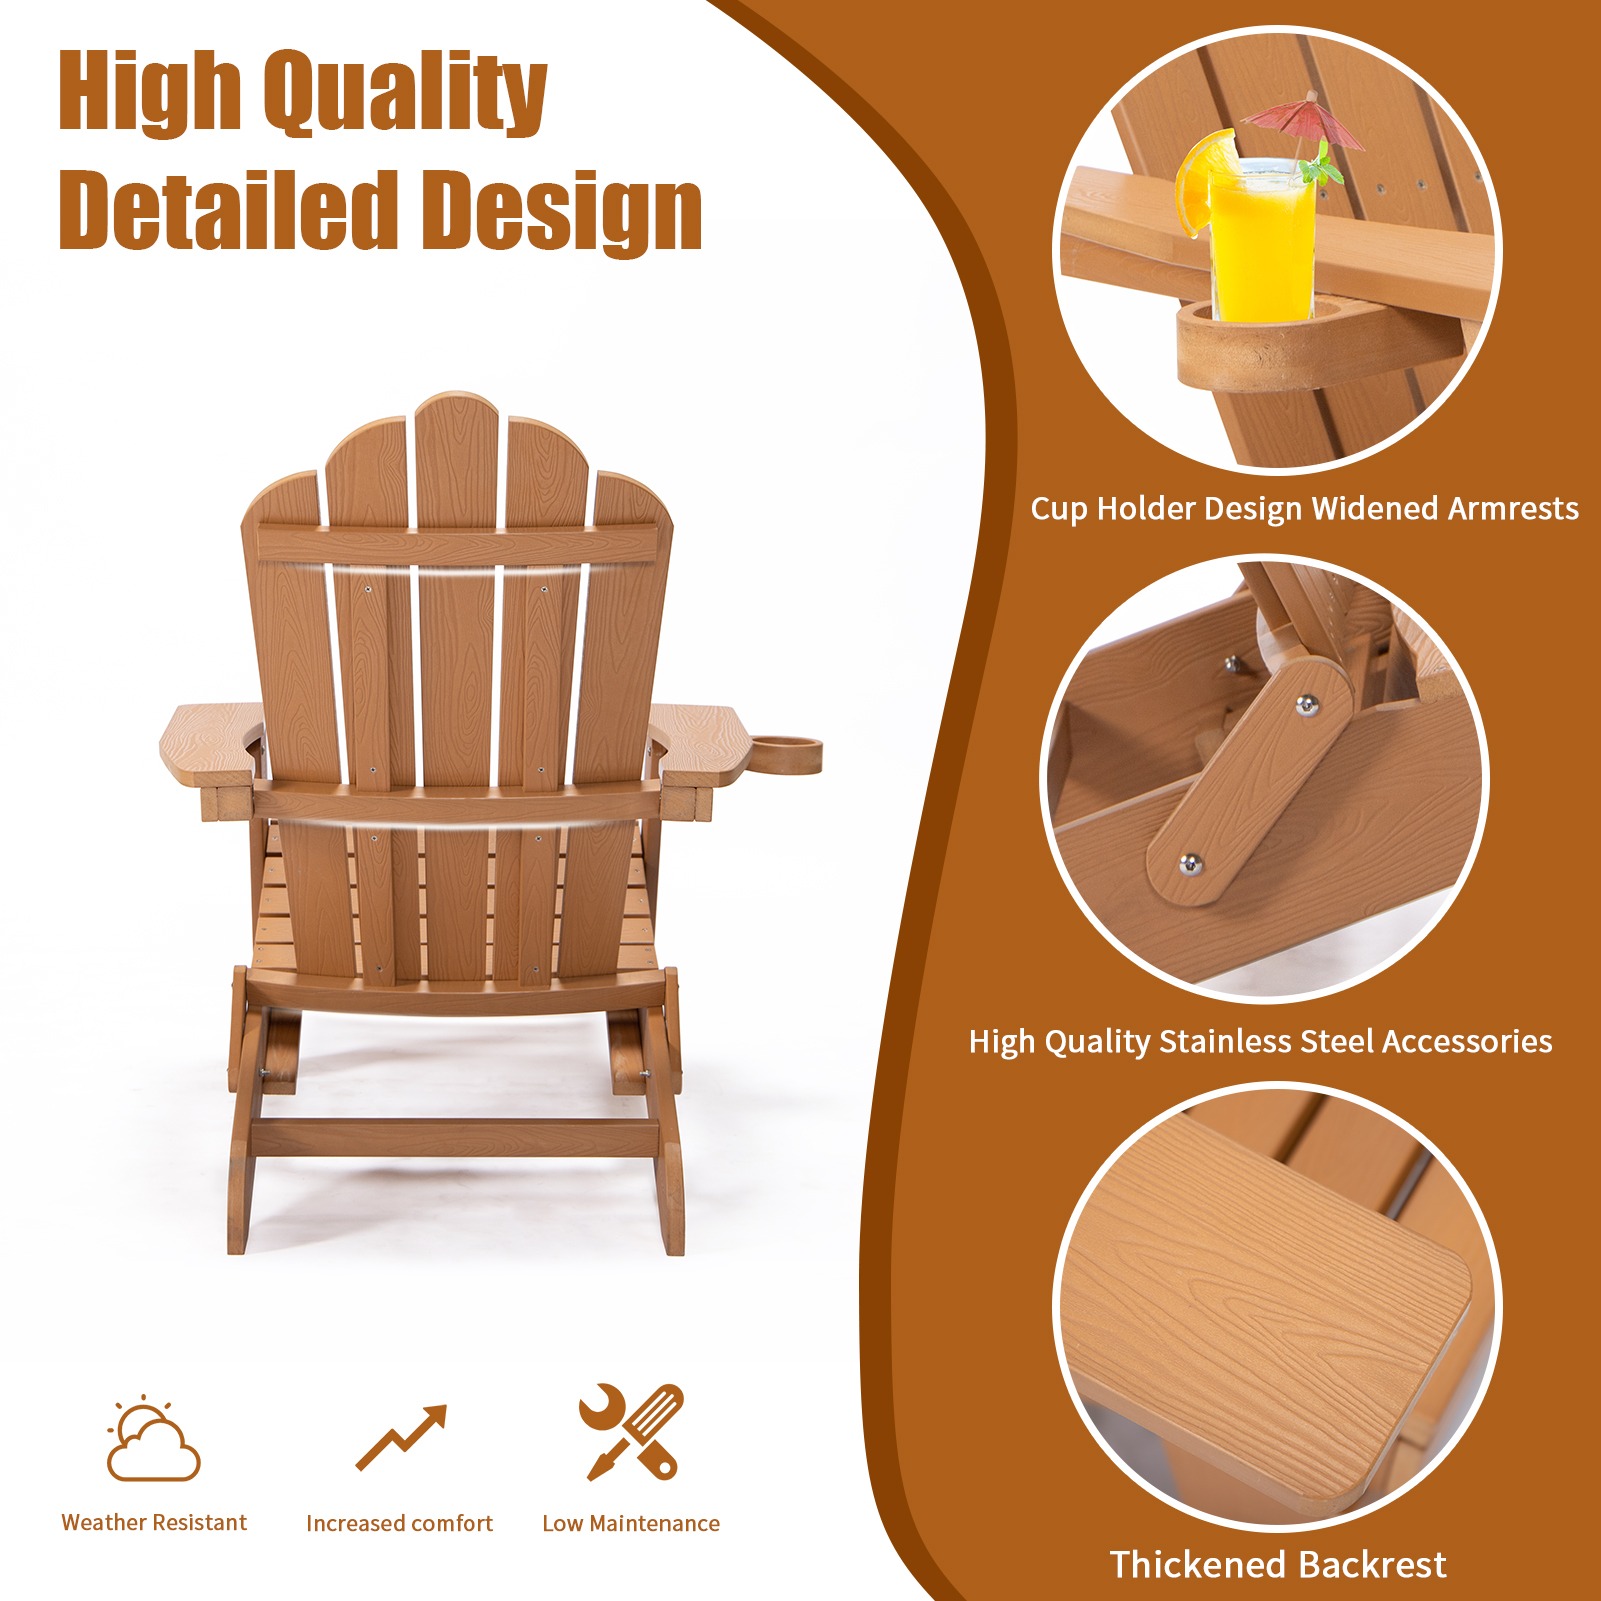 Branax Folding Adirondack Chair, Patio Chairs, Lawn Chair, Outdoor Chairs Painted Adirondack Chair Weather Resistant for Patio Deck Garden, Backyard Deck, 400 lbs Capacity Load, Brown - image 5 of 8